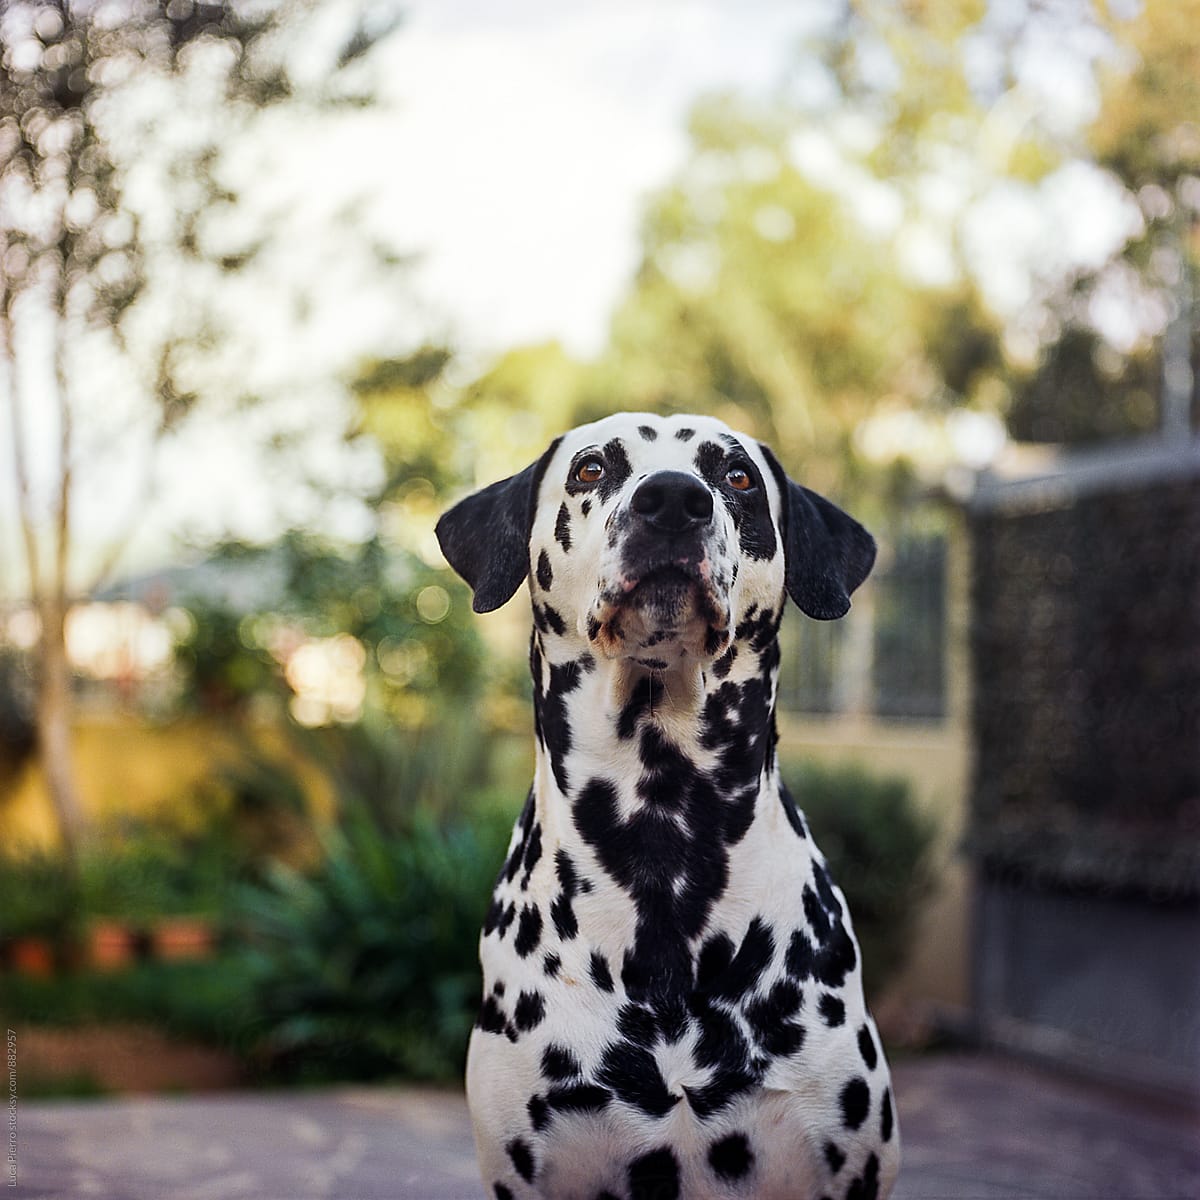 Dalmatian dog with fluffy flaps